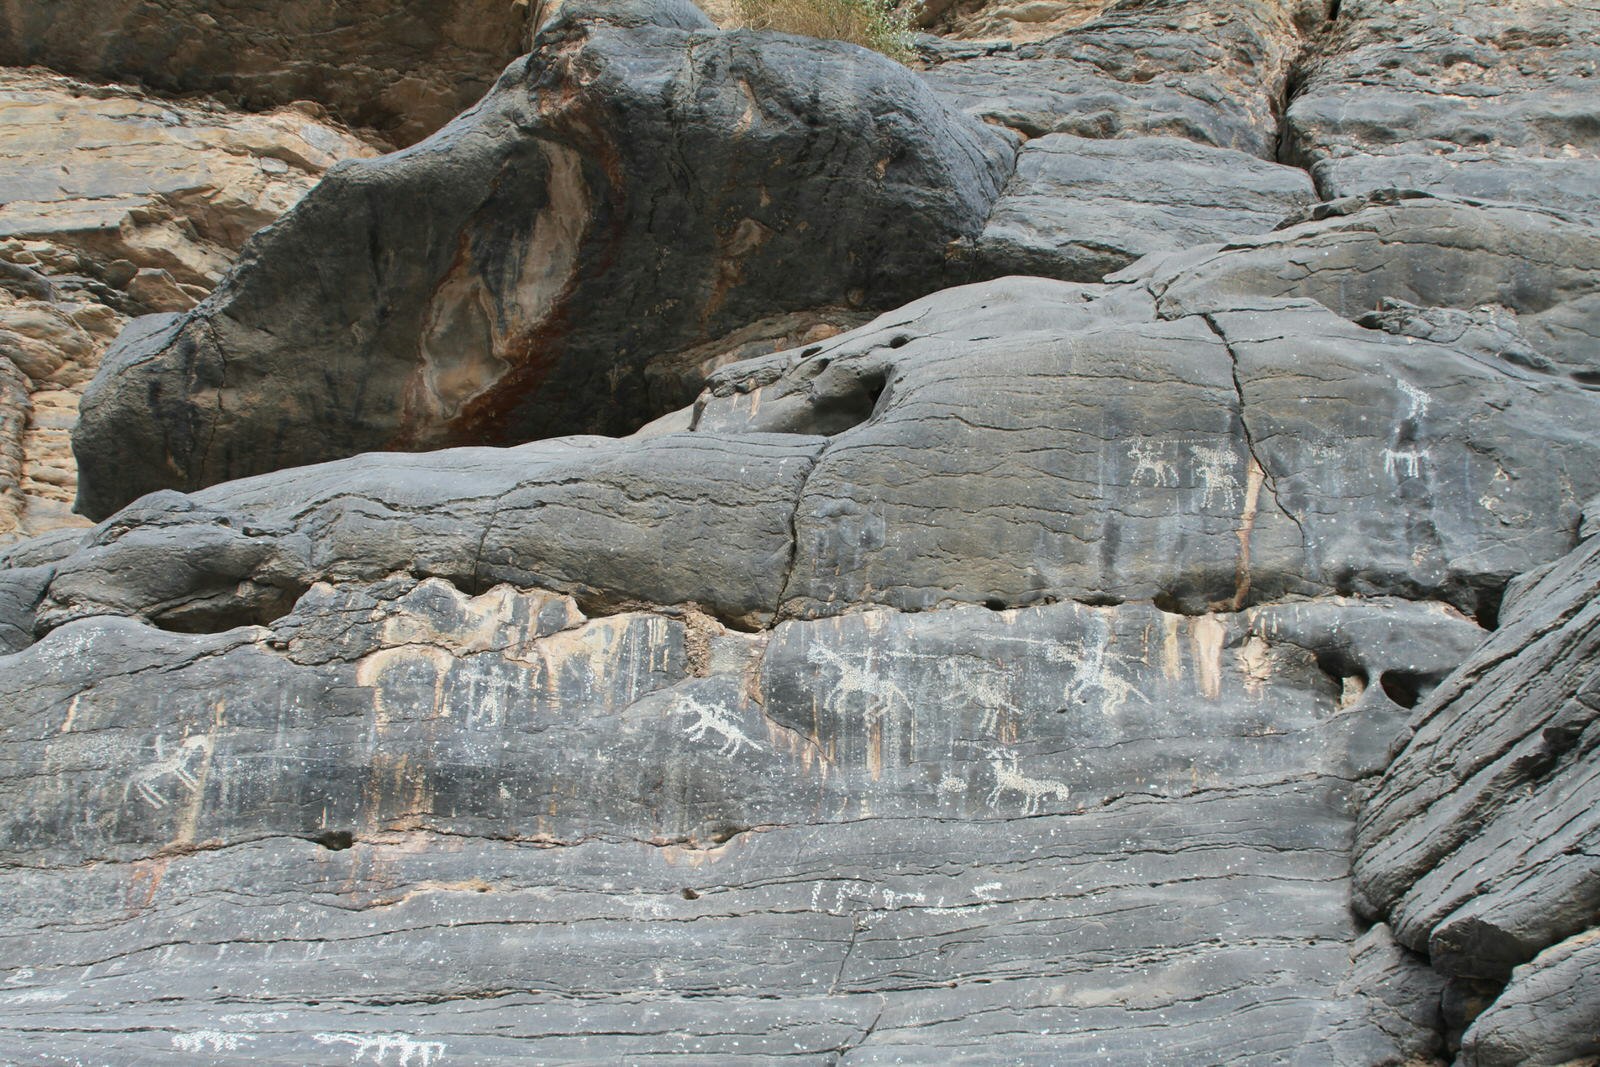 Petroglyphs are etched into the walls of Wadi Bani Kharus. Image by Jenny Walker / Lonely Planet